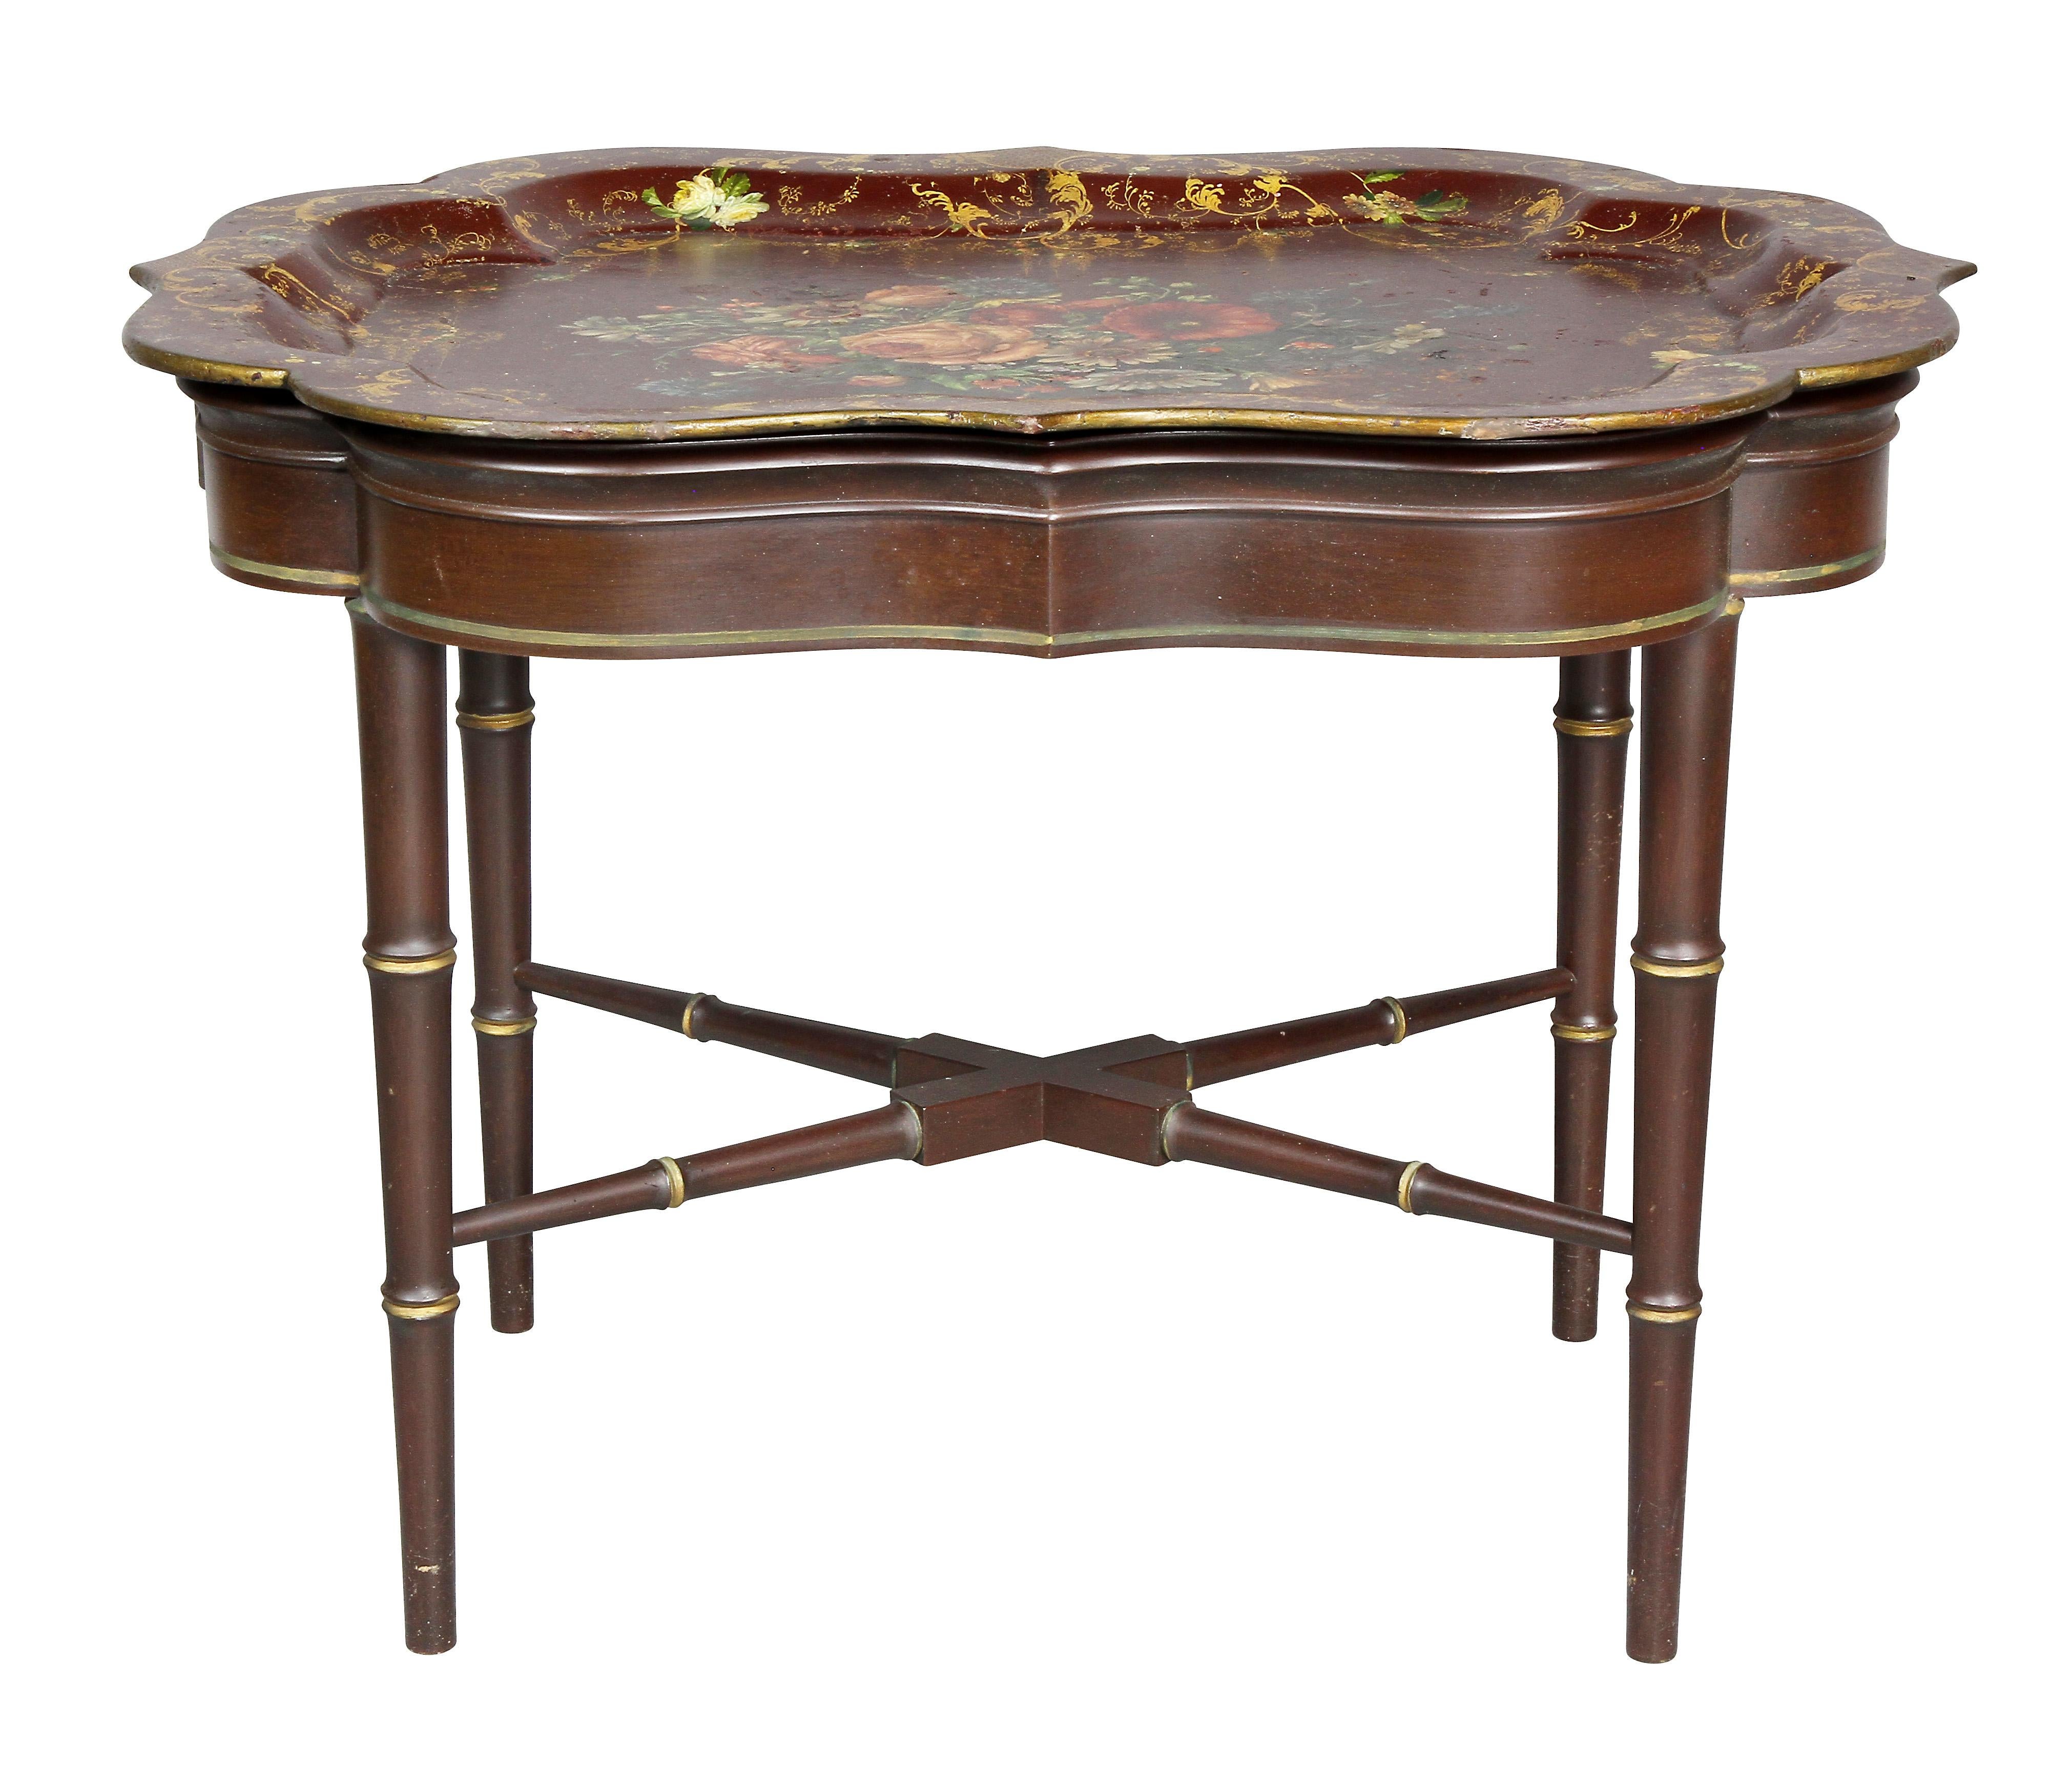 Scalloped shape reddish brown tray with vibrant floral design, later faux bamboo base. Provenance; Estate of John Volk. Noted Palm Beach architect.